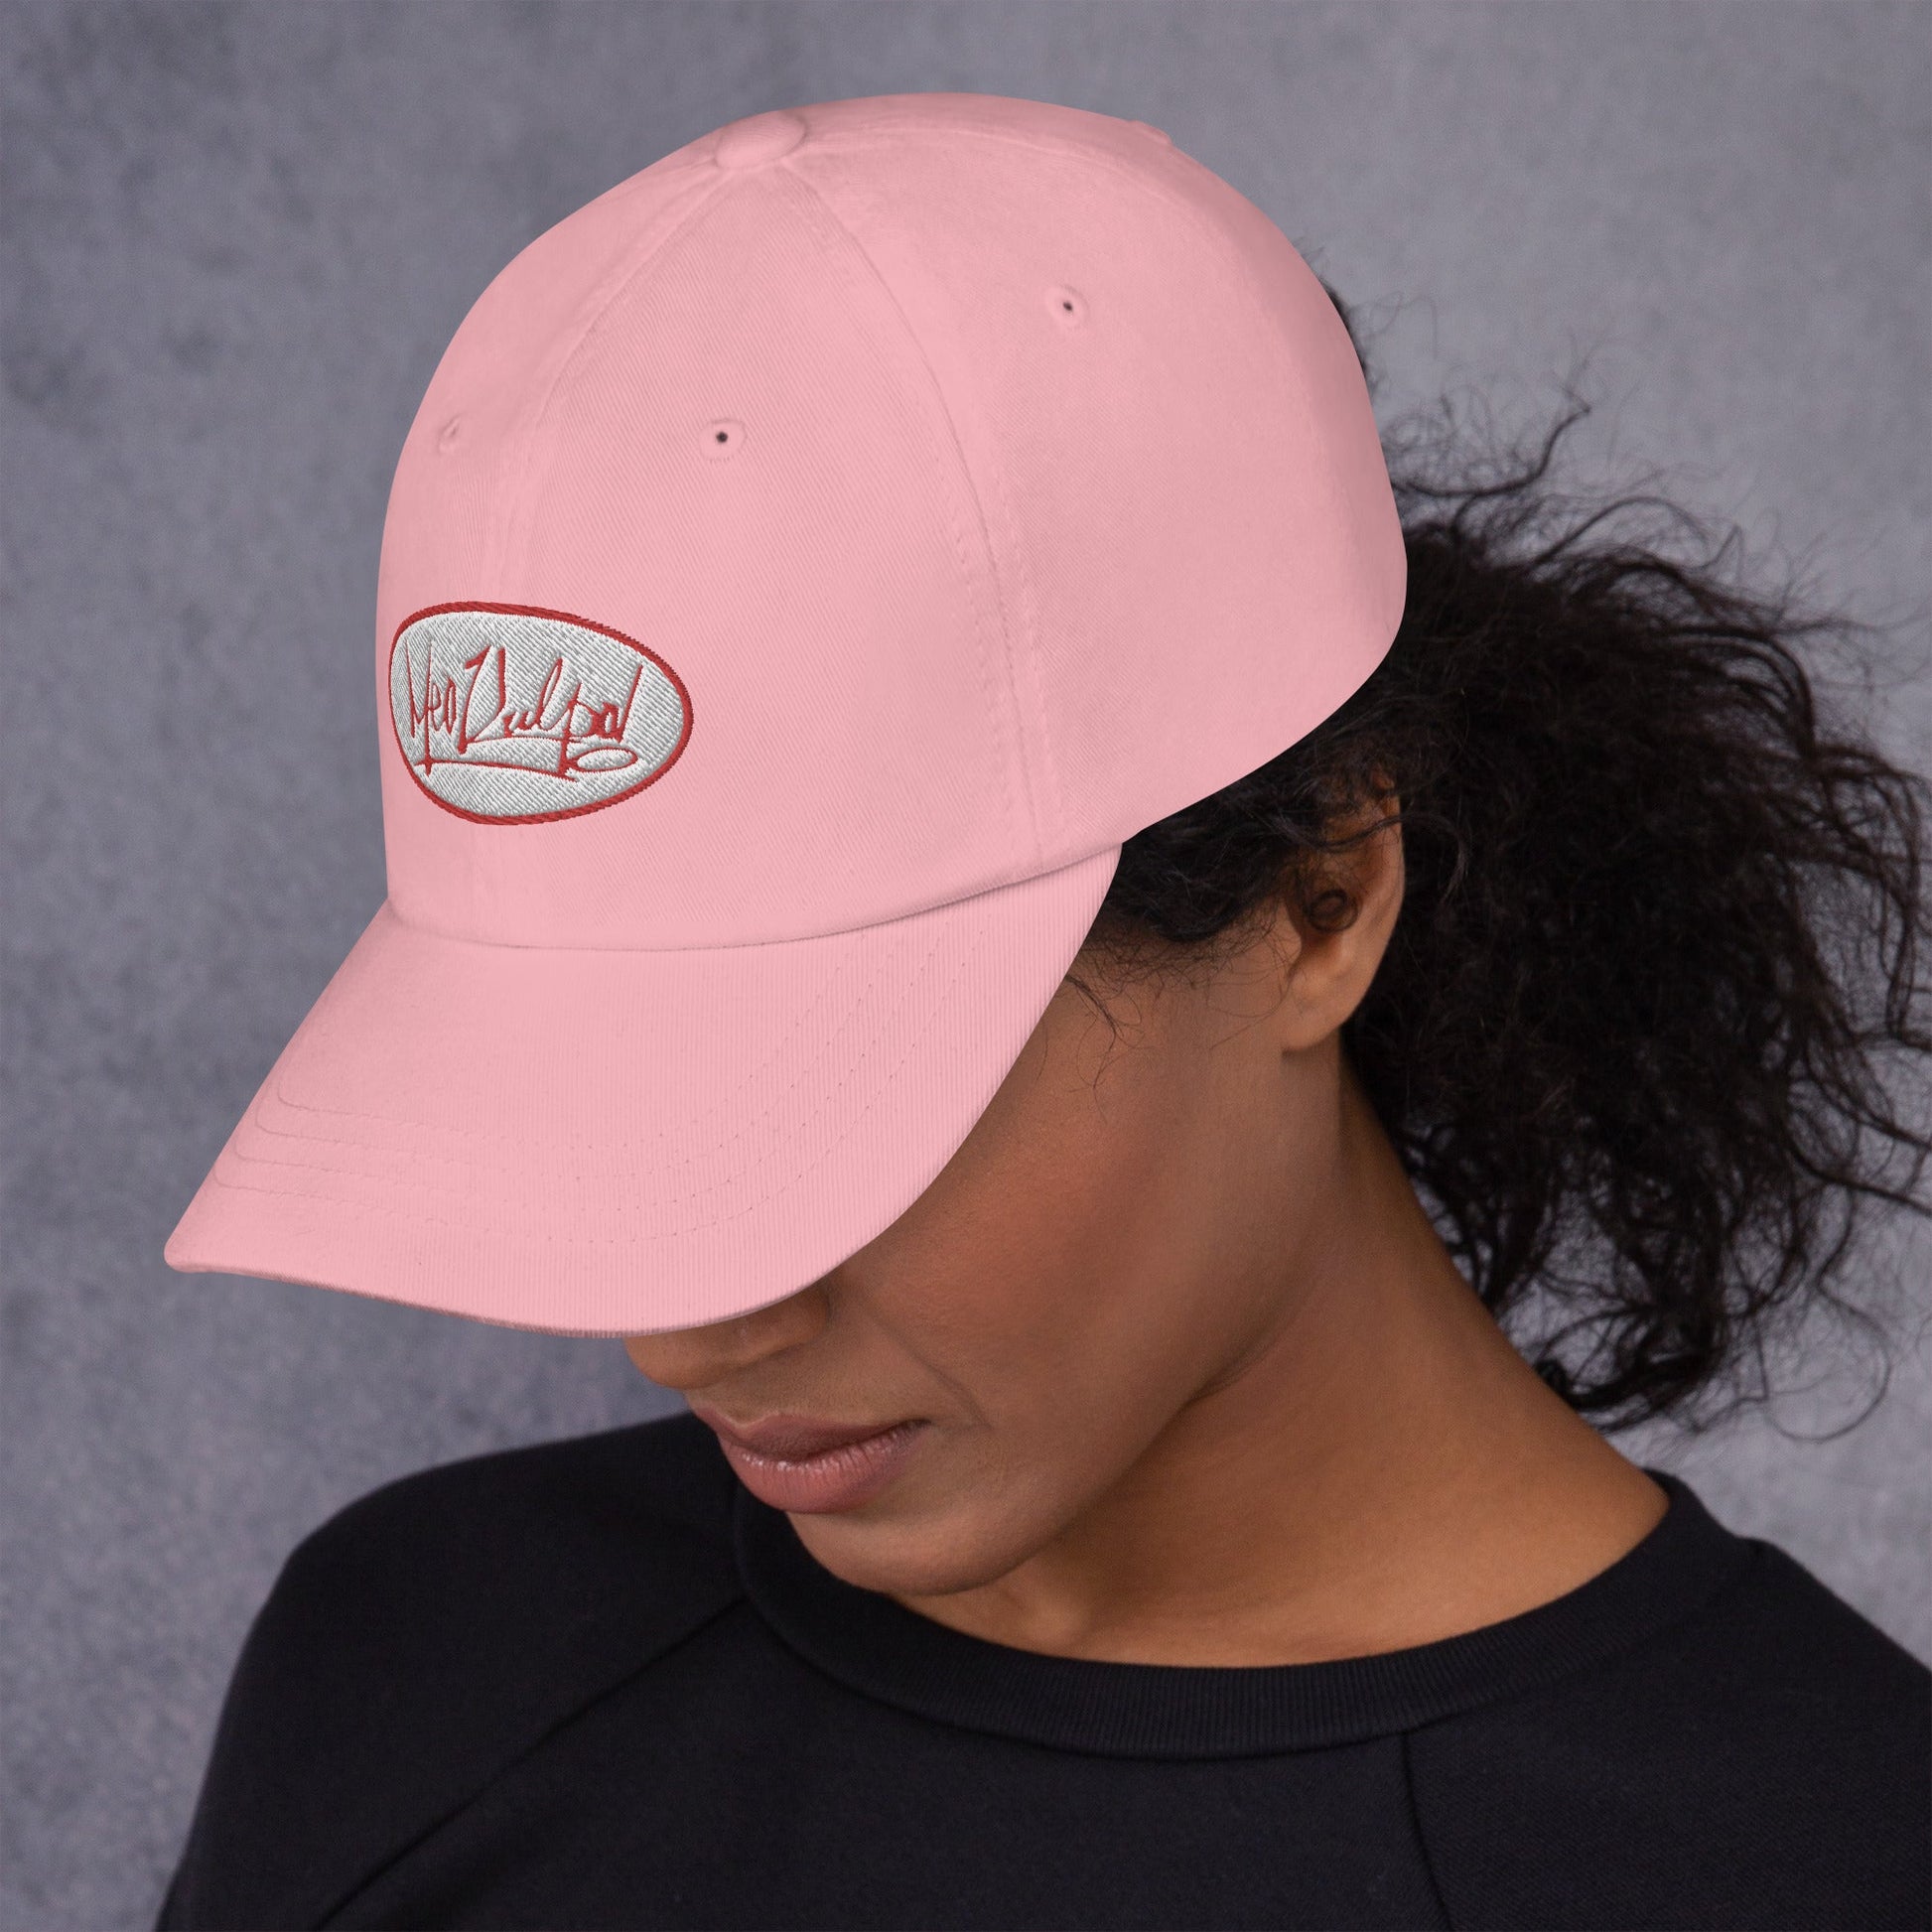 Meet our trendsetter in the MeaKulpa Pink Hat featuring the iconic Red and White OG Logo. With an air of confidence, she effortlessly fuses street-style chic with a touch of rebellion, creating a look that's both edgy and charming. Embrace the vibe and make your statement.